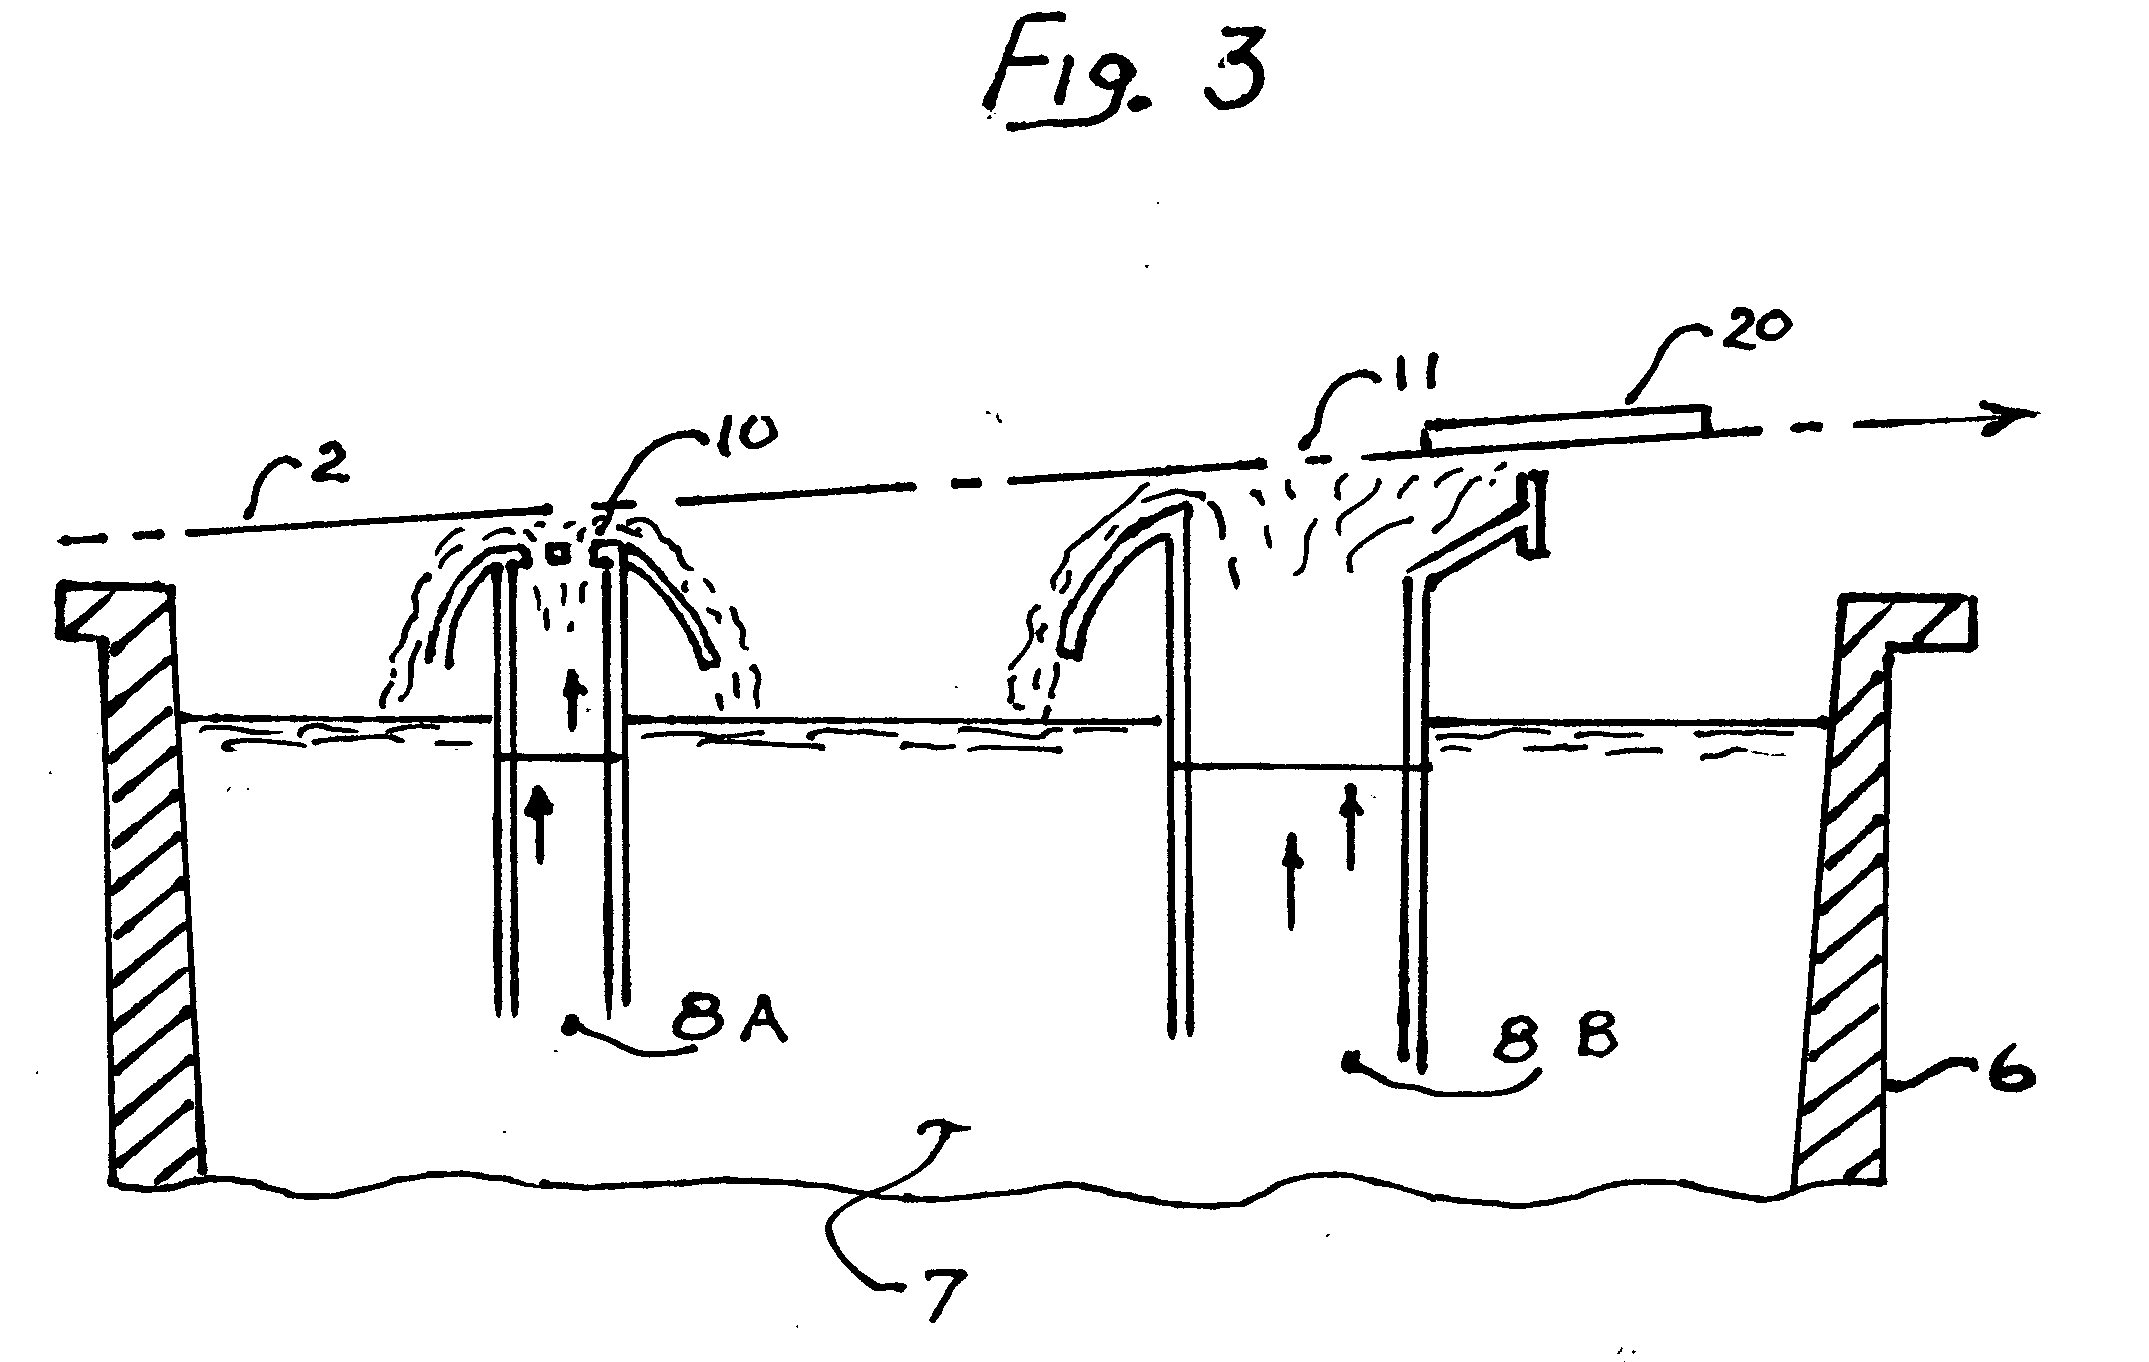 Wide wave apparatus for soldering an electronic assembly